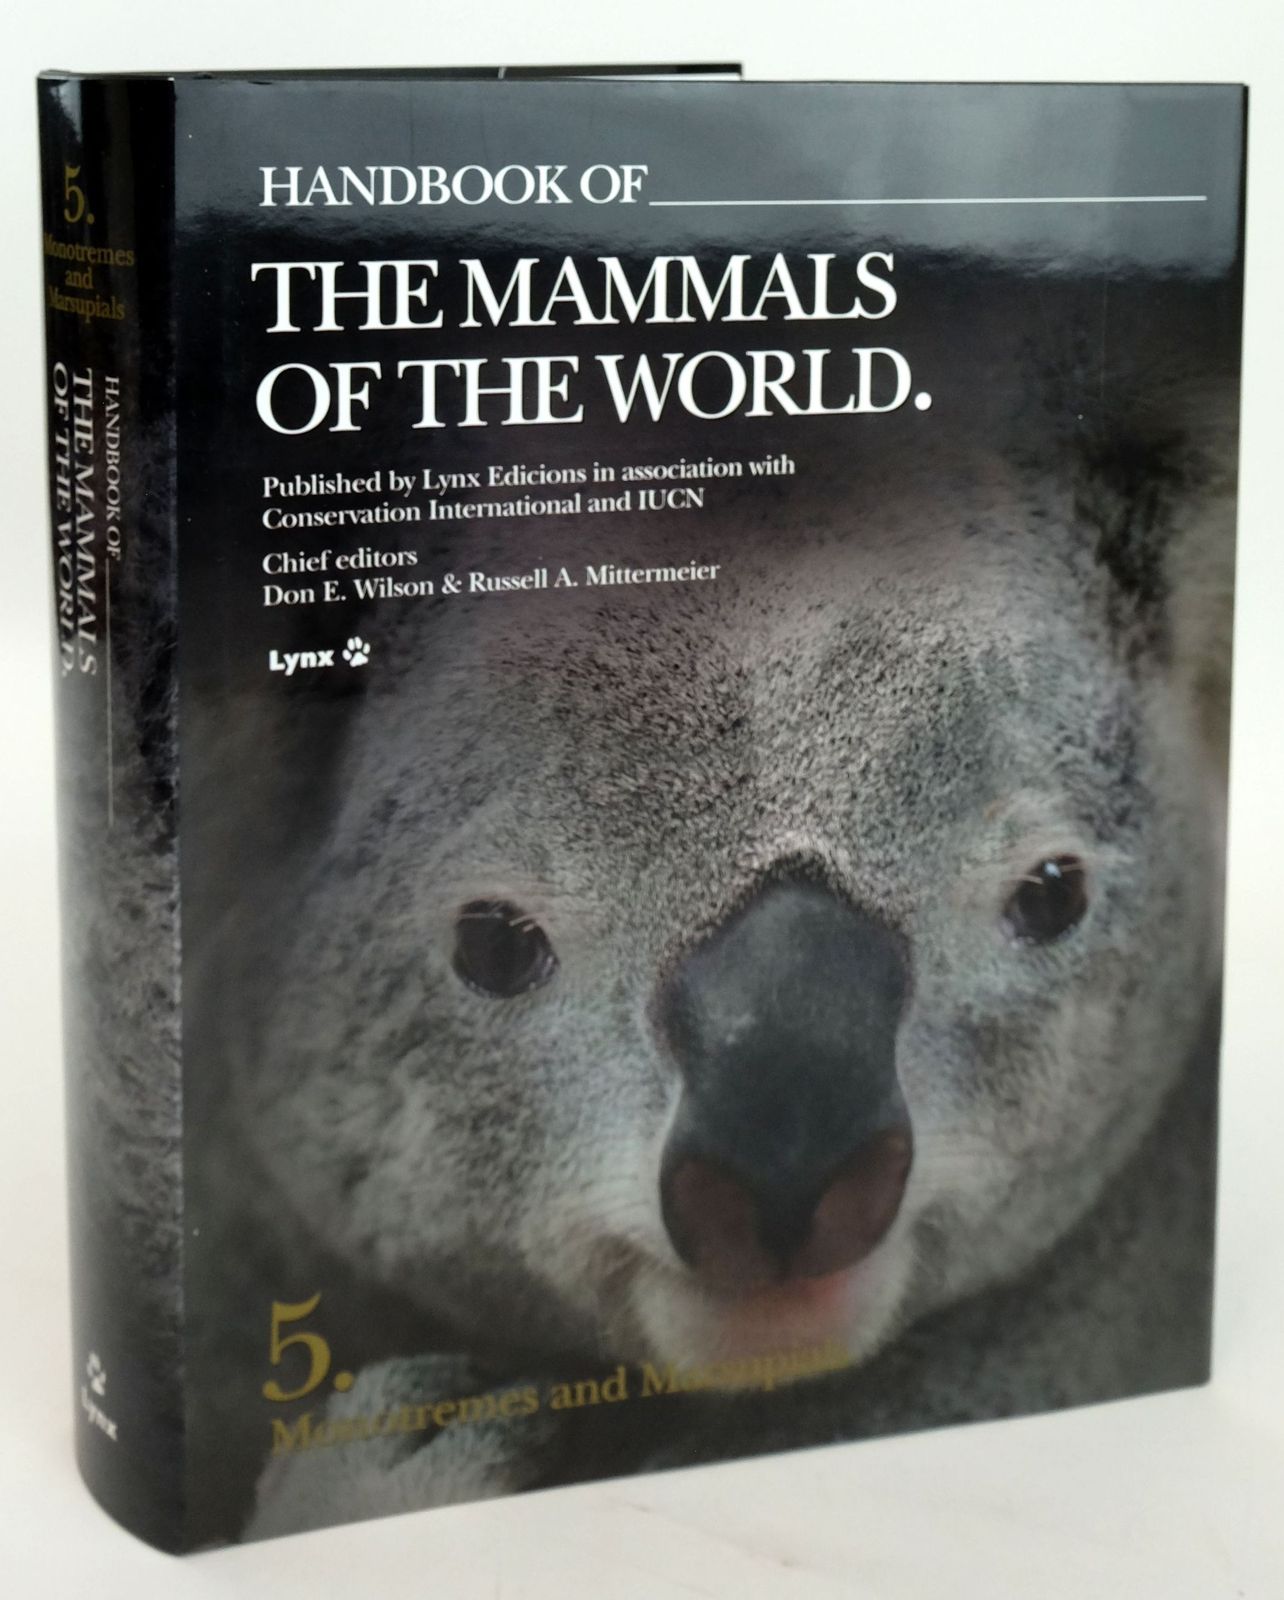 HANDBOOK OF THE MAMMALS OF THE WORLD 5. MONOTREMES AND MARSUPIALS - Wilson, Don E. & Mittermeier, Russell A. & et al,